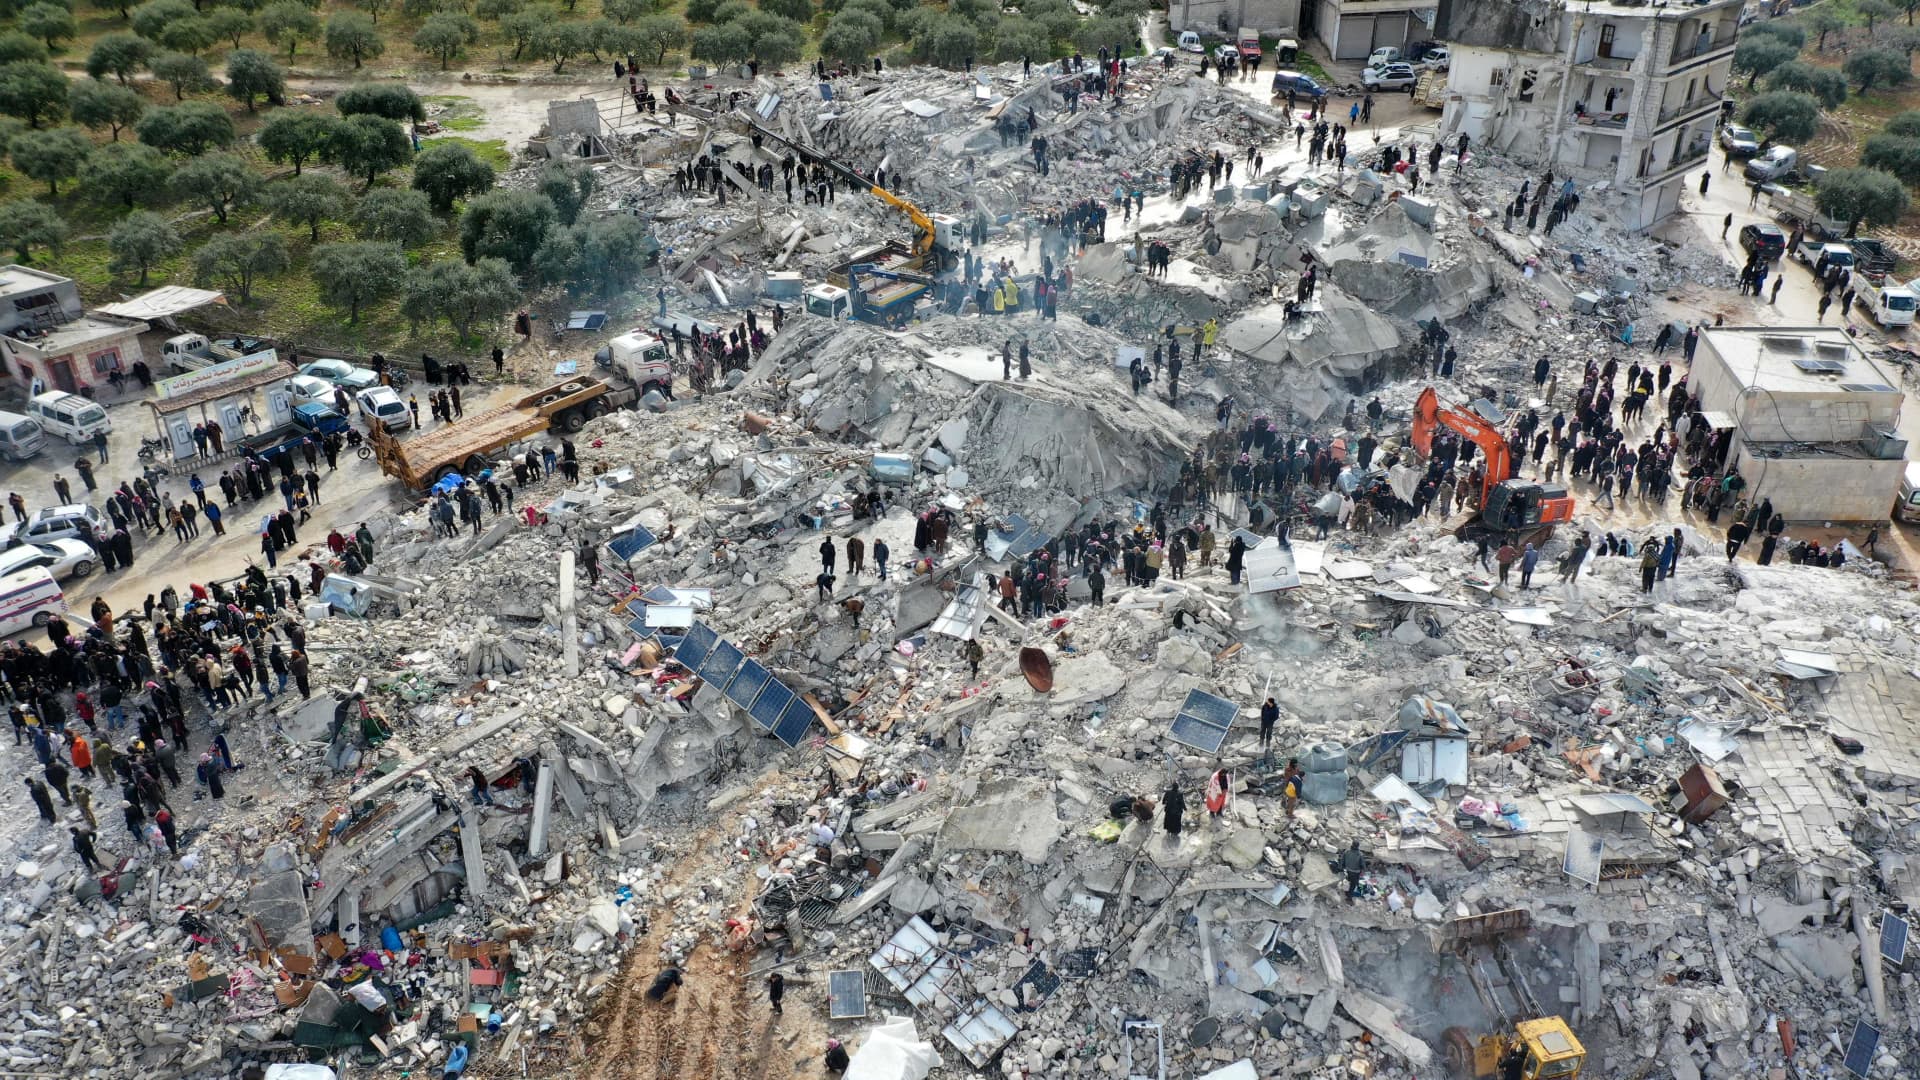 This aerial view shows residents searching for victims and survivors amidst the rubble of collapsed buildings following an earthquake in the village of Besnia near the twon of Harim, in Syria's rebel-held noryhwestern Idlib province on the border with Turkey, on February 6, 2022.